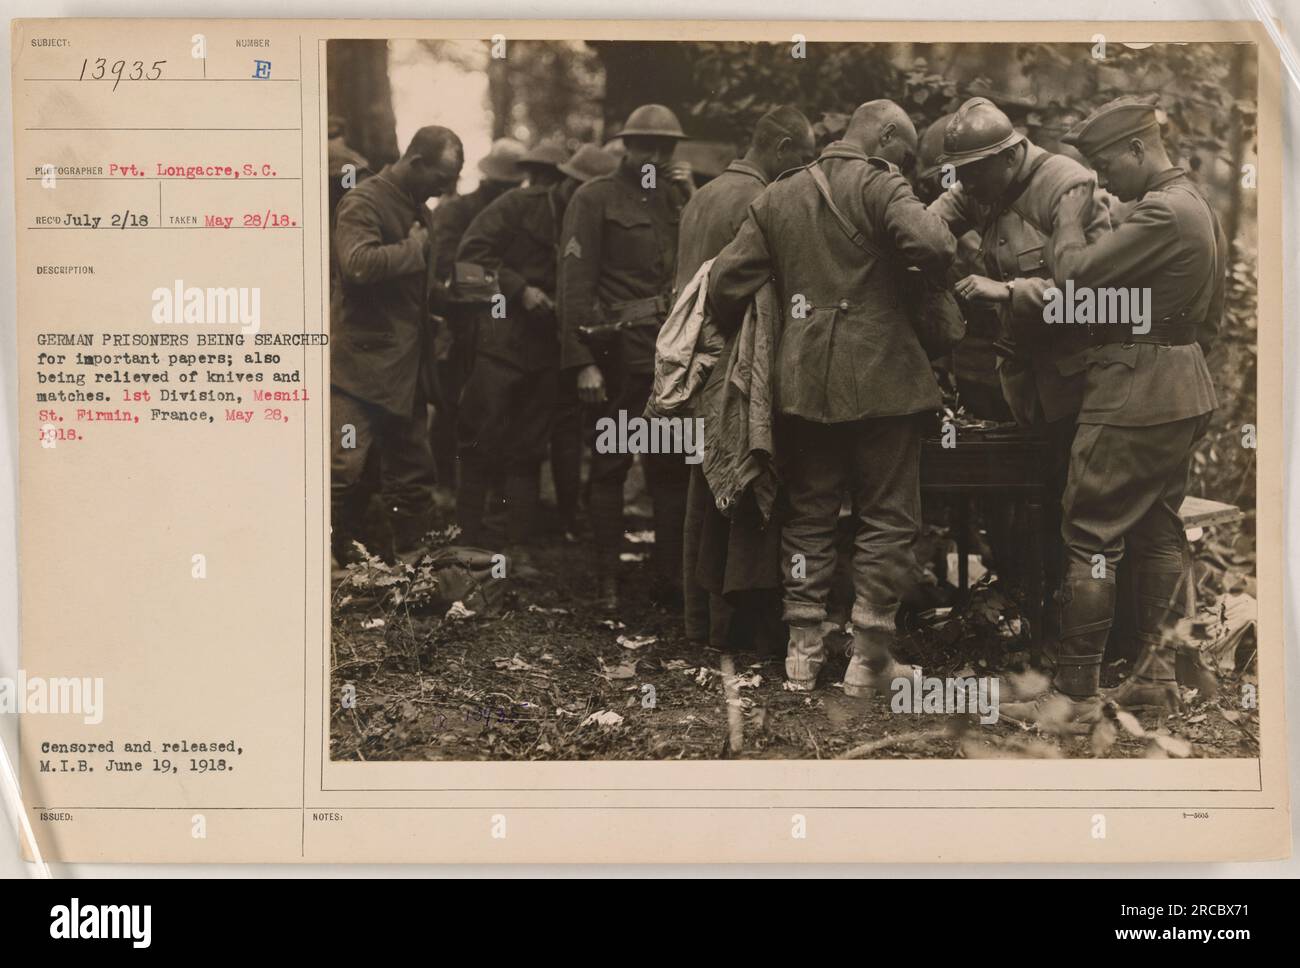 German prisoners being searched for documents and confiscated of knives and matches by American soldiers. Taken in Mesnil St. Pirmin, France, on May 28, 1918, by Pvt. Longacre, S. C. Image subjected to censorship and released by M.I.B on June 19, 1918. Stock Photo